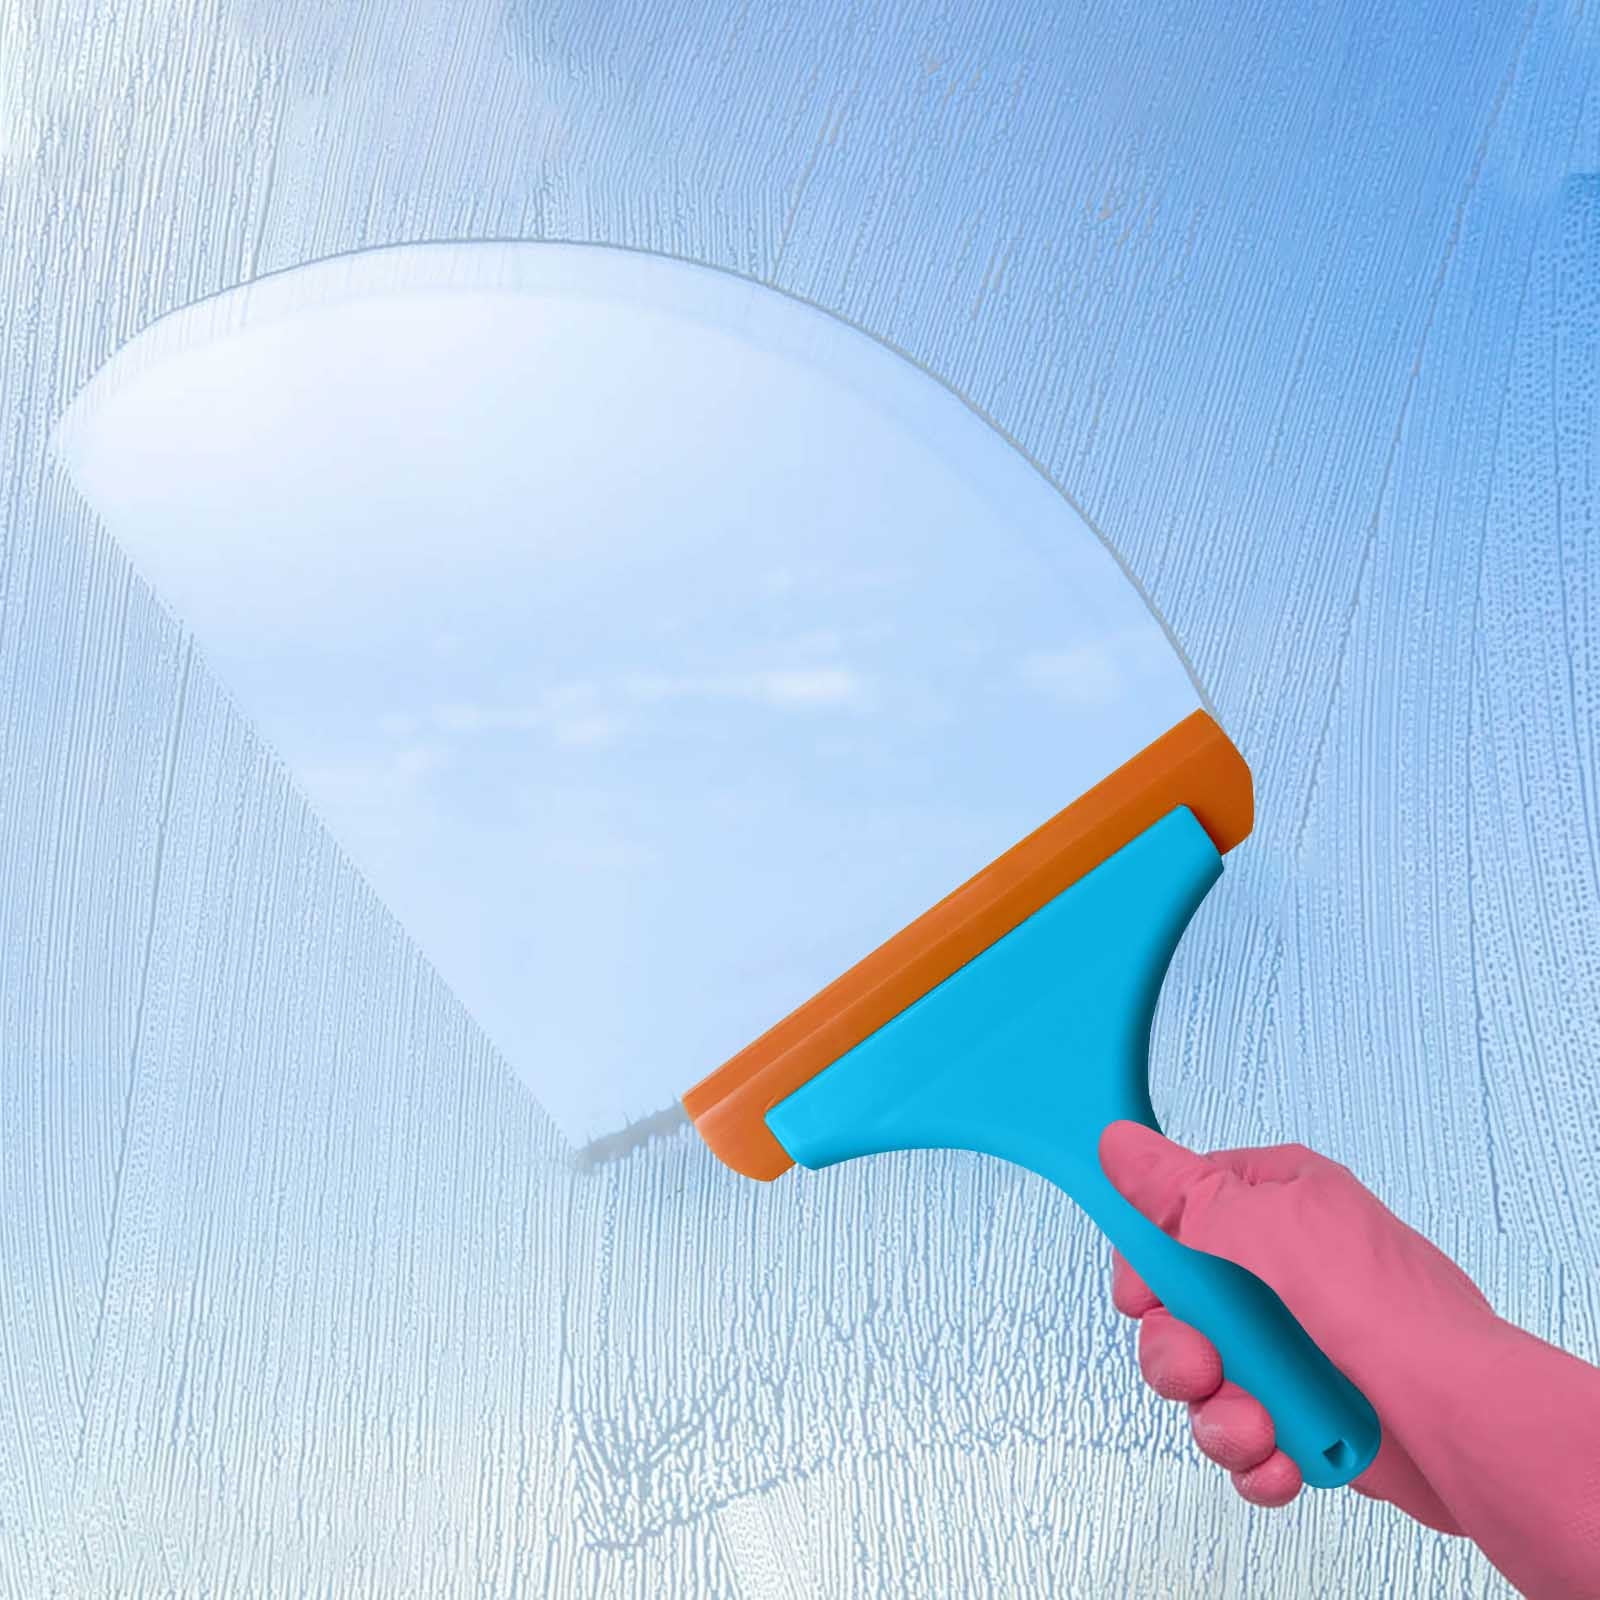 FOSHIO 2PCSHandle Silicone Squeegee Auto Water Wiper Blade Shower Sque